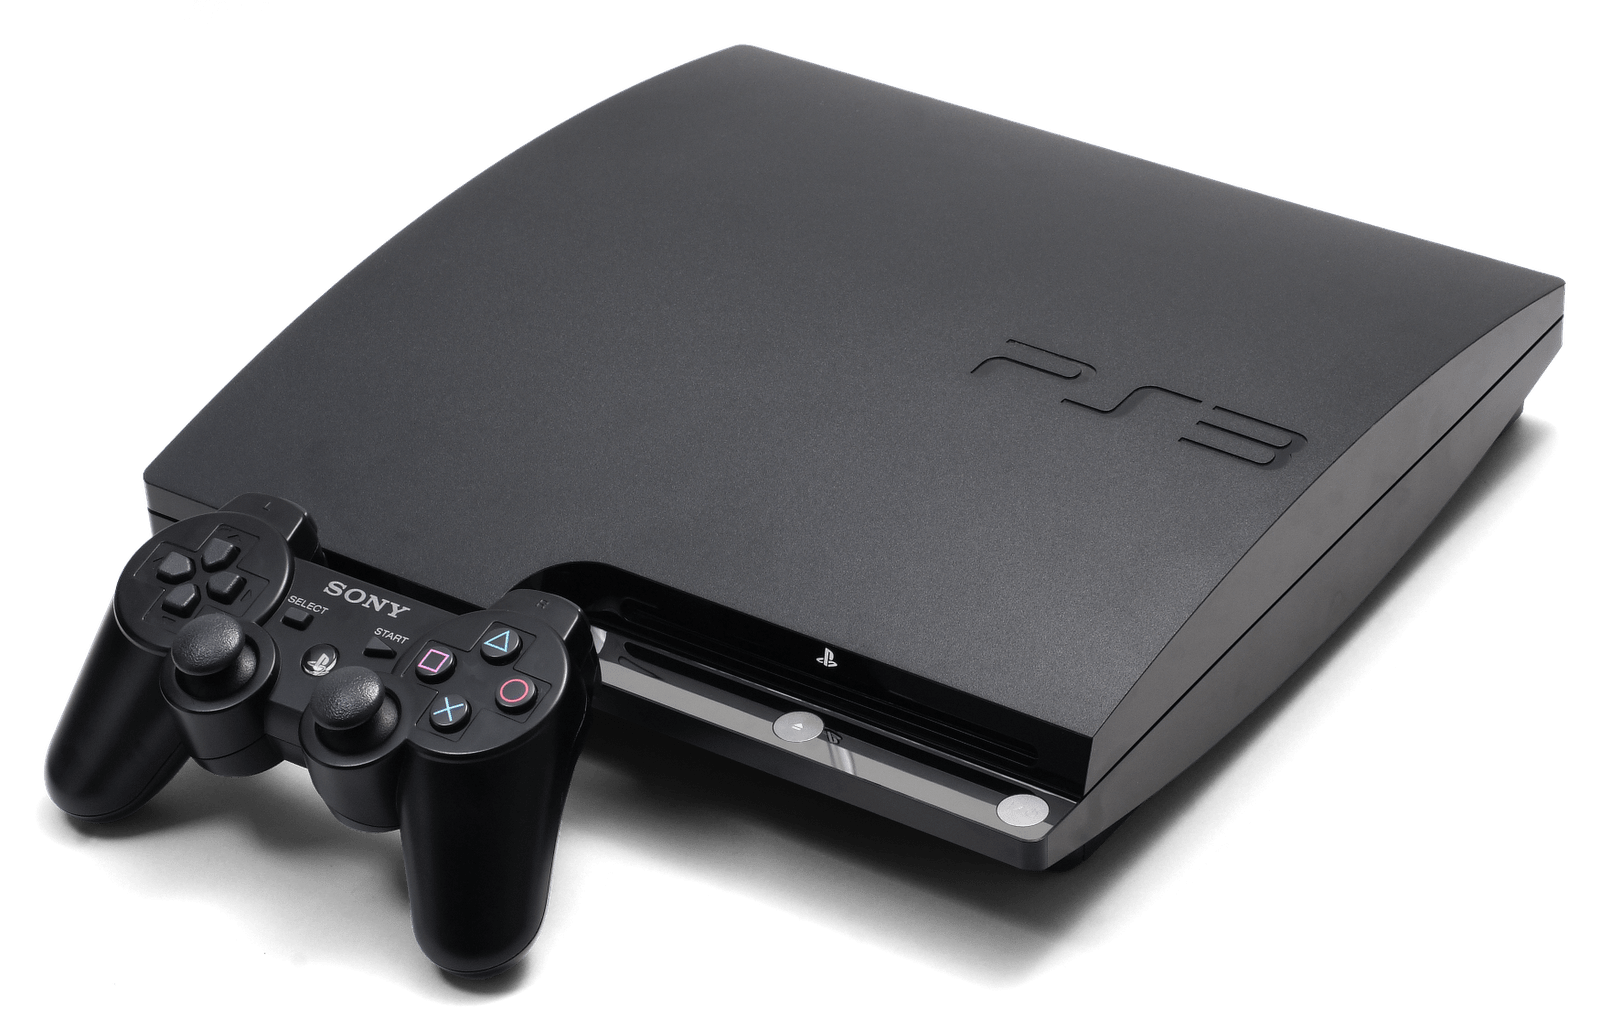 Sony has shipped its last ever PlayStation 3 in Japan